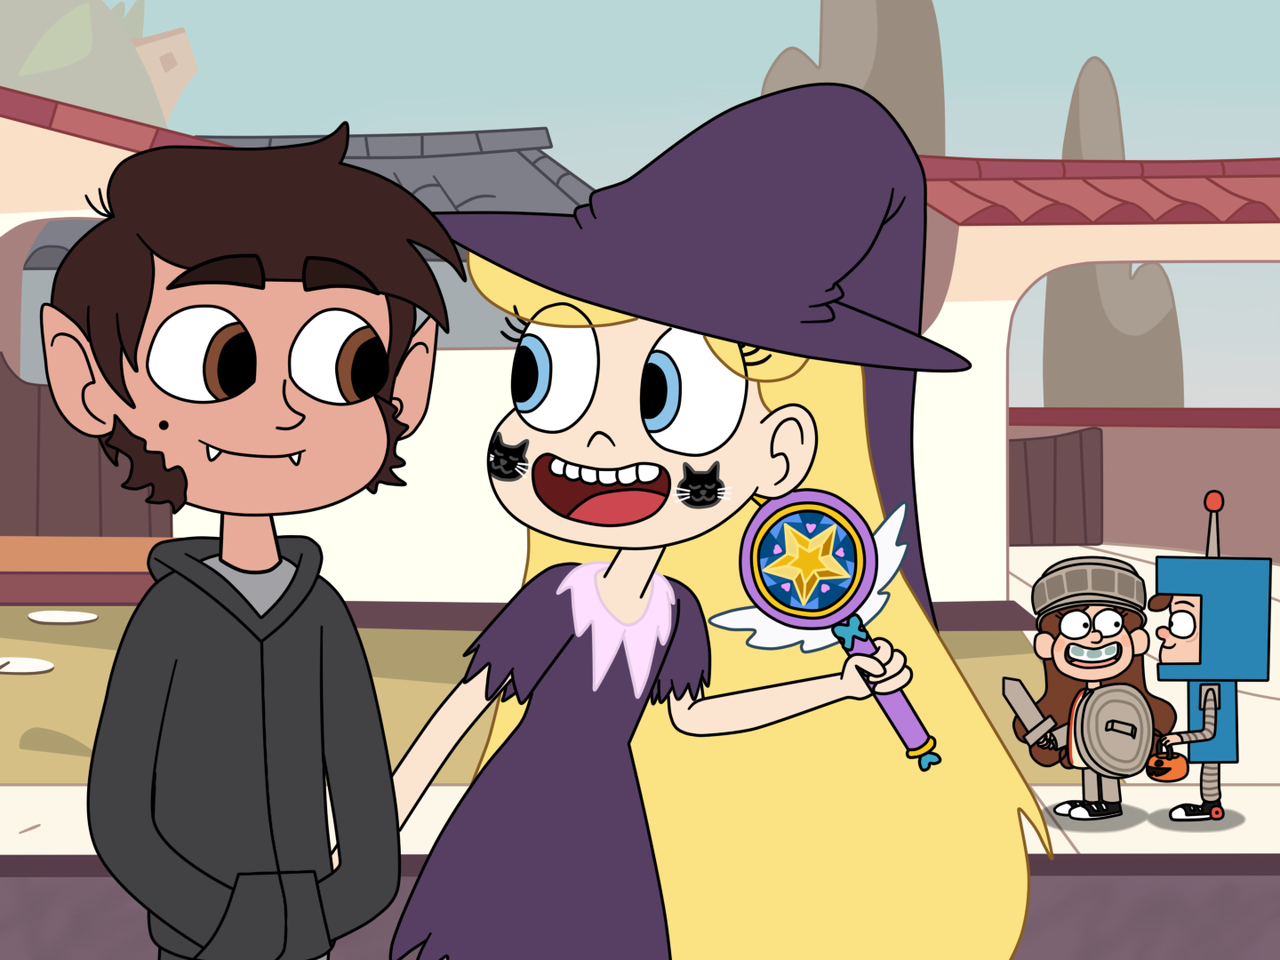 Marco Diaz And Star Butterfly In Star Vs. The Forces Of Evil Wallpapers